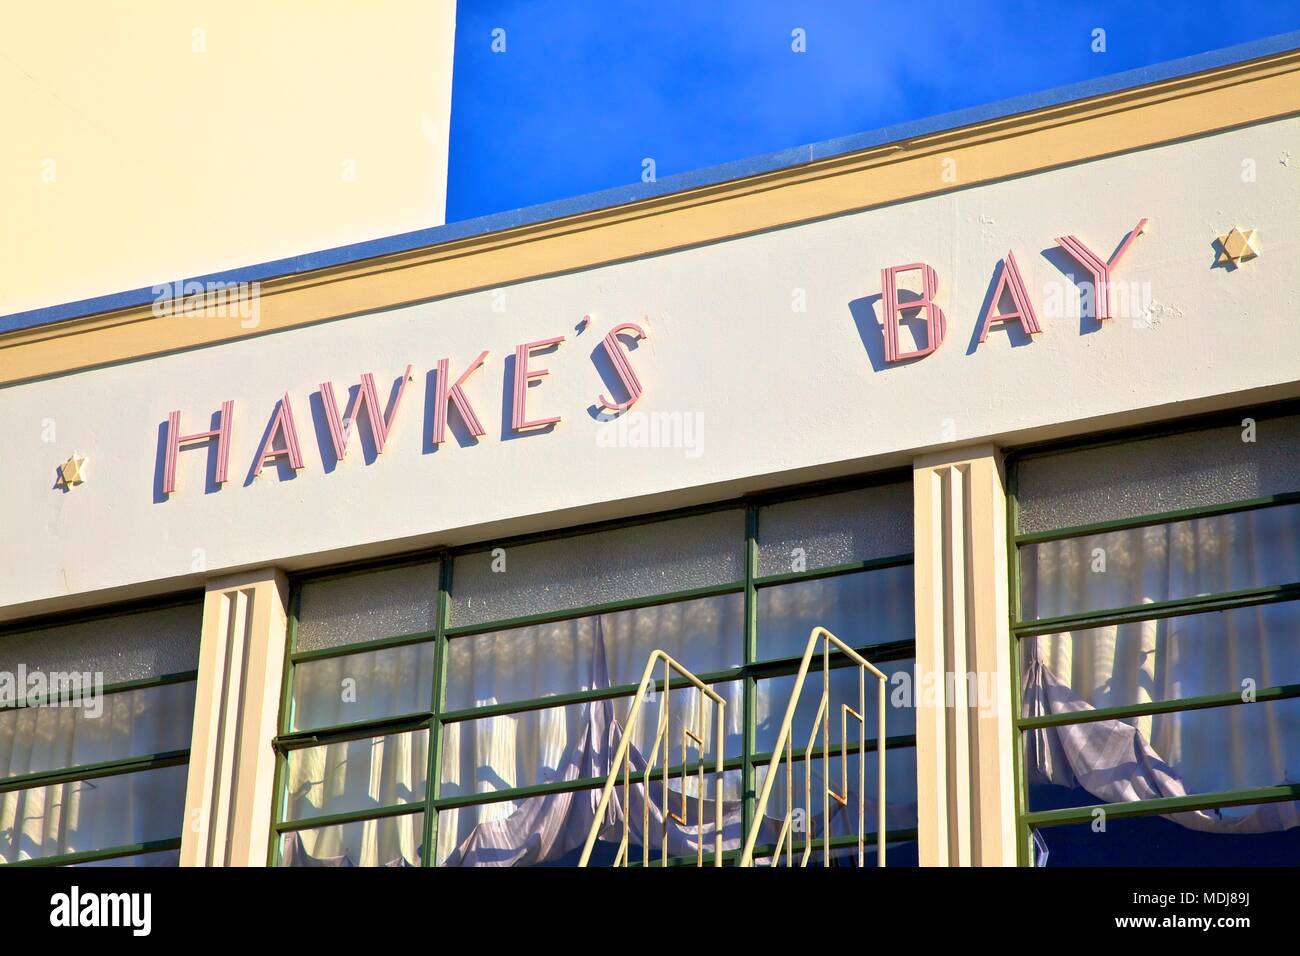 Hawkes Bay Chambers Art Deco Building, Napier, Hawkes Bay, New Zealand, South West Pacific Ocean Stock Photo